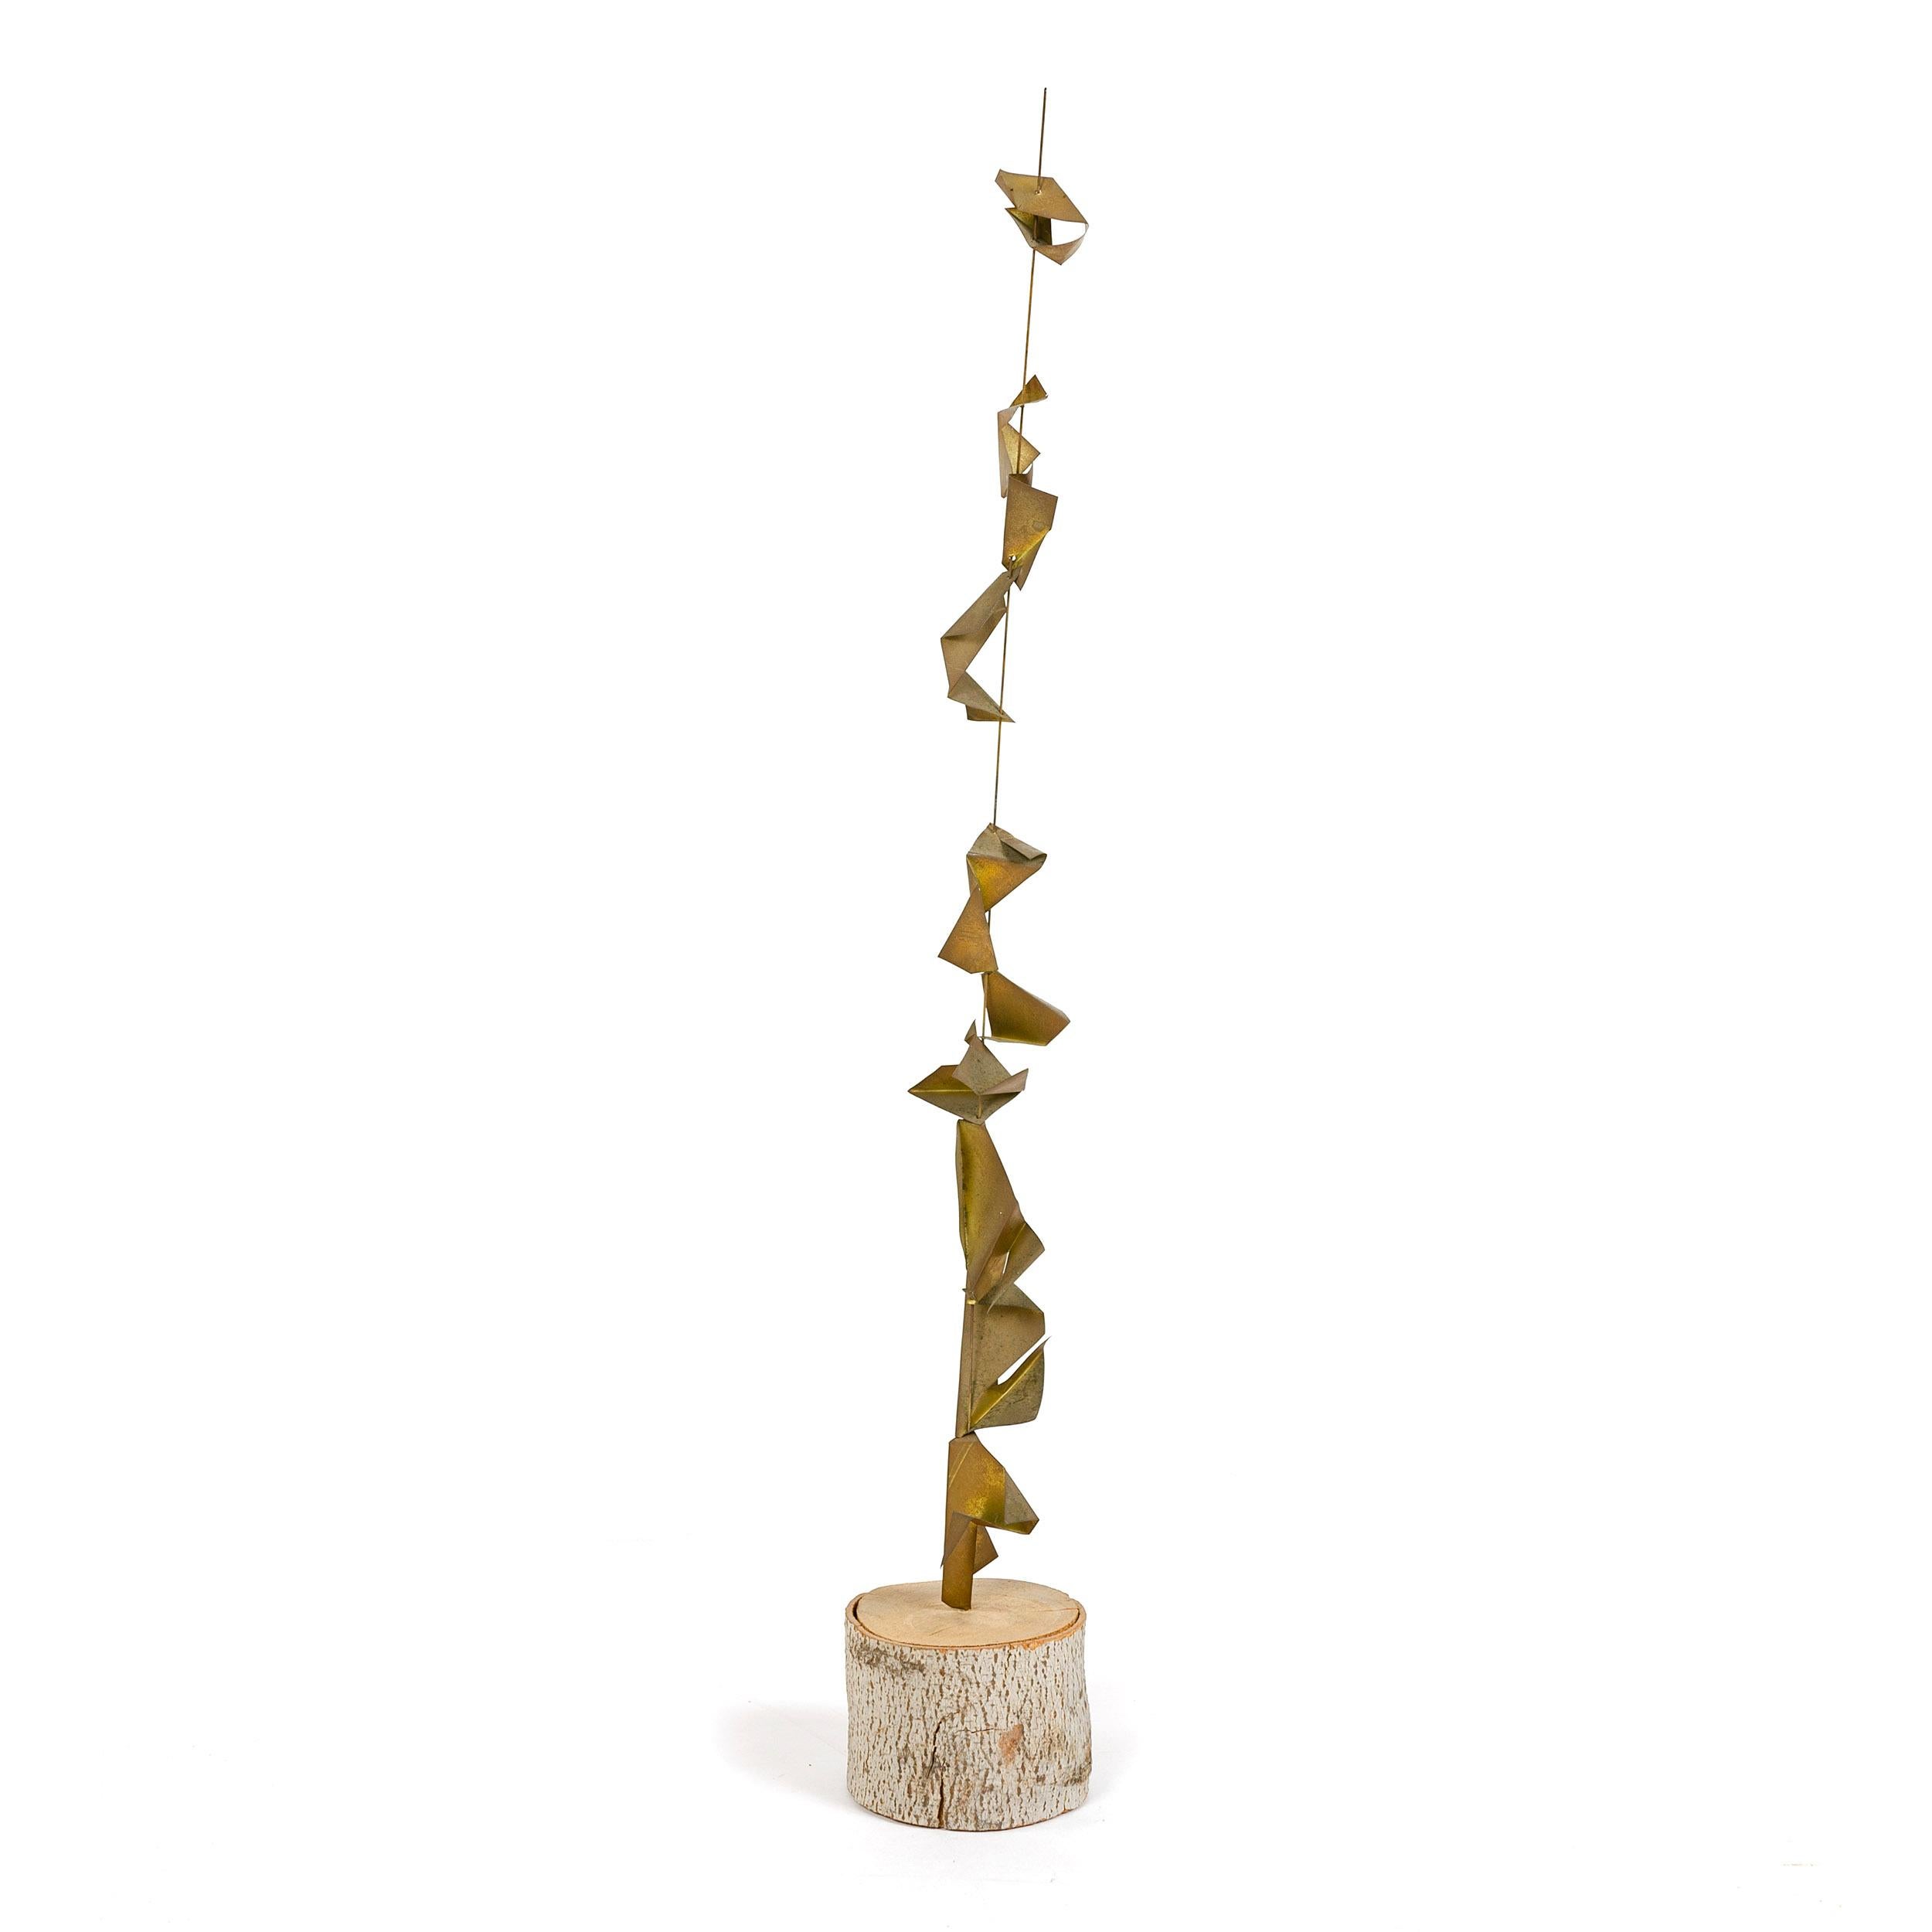 A metal sculpture consisting of a thin rigid wire with folded, fortune-cookie-shape pieces of naturally patinated brass slipped onto the rod and stacked vertically. The rod is set in a round, drum shaped slab of birch retaining its original bark.